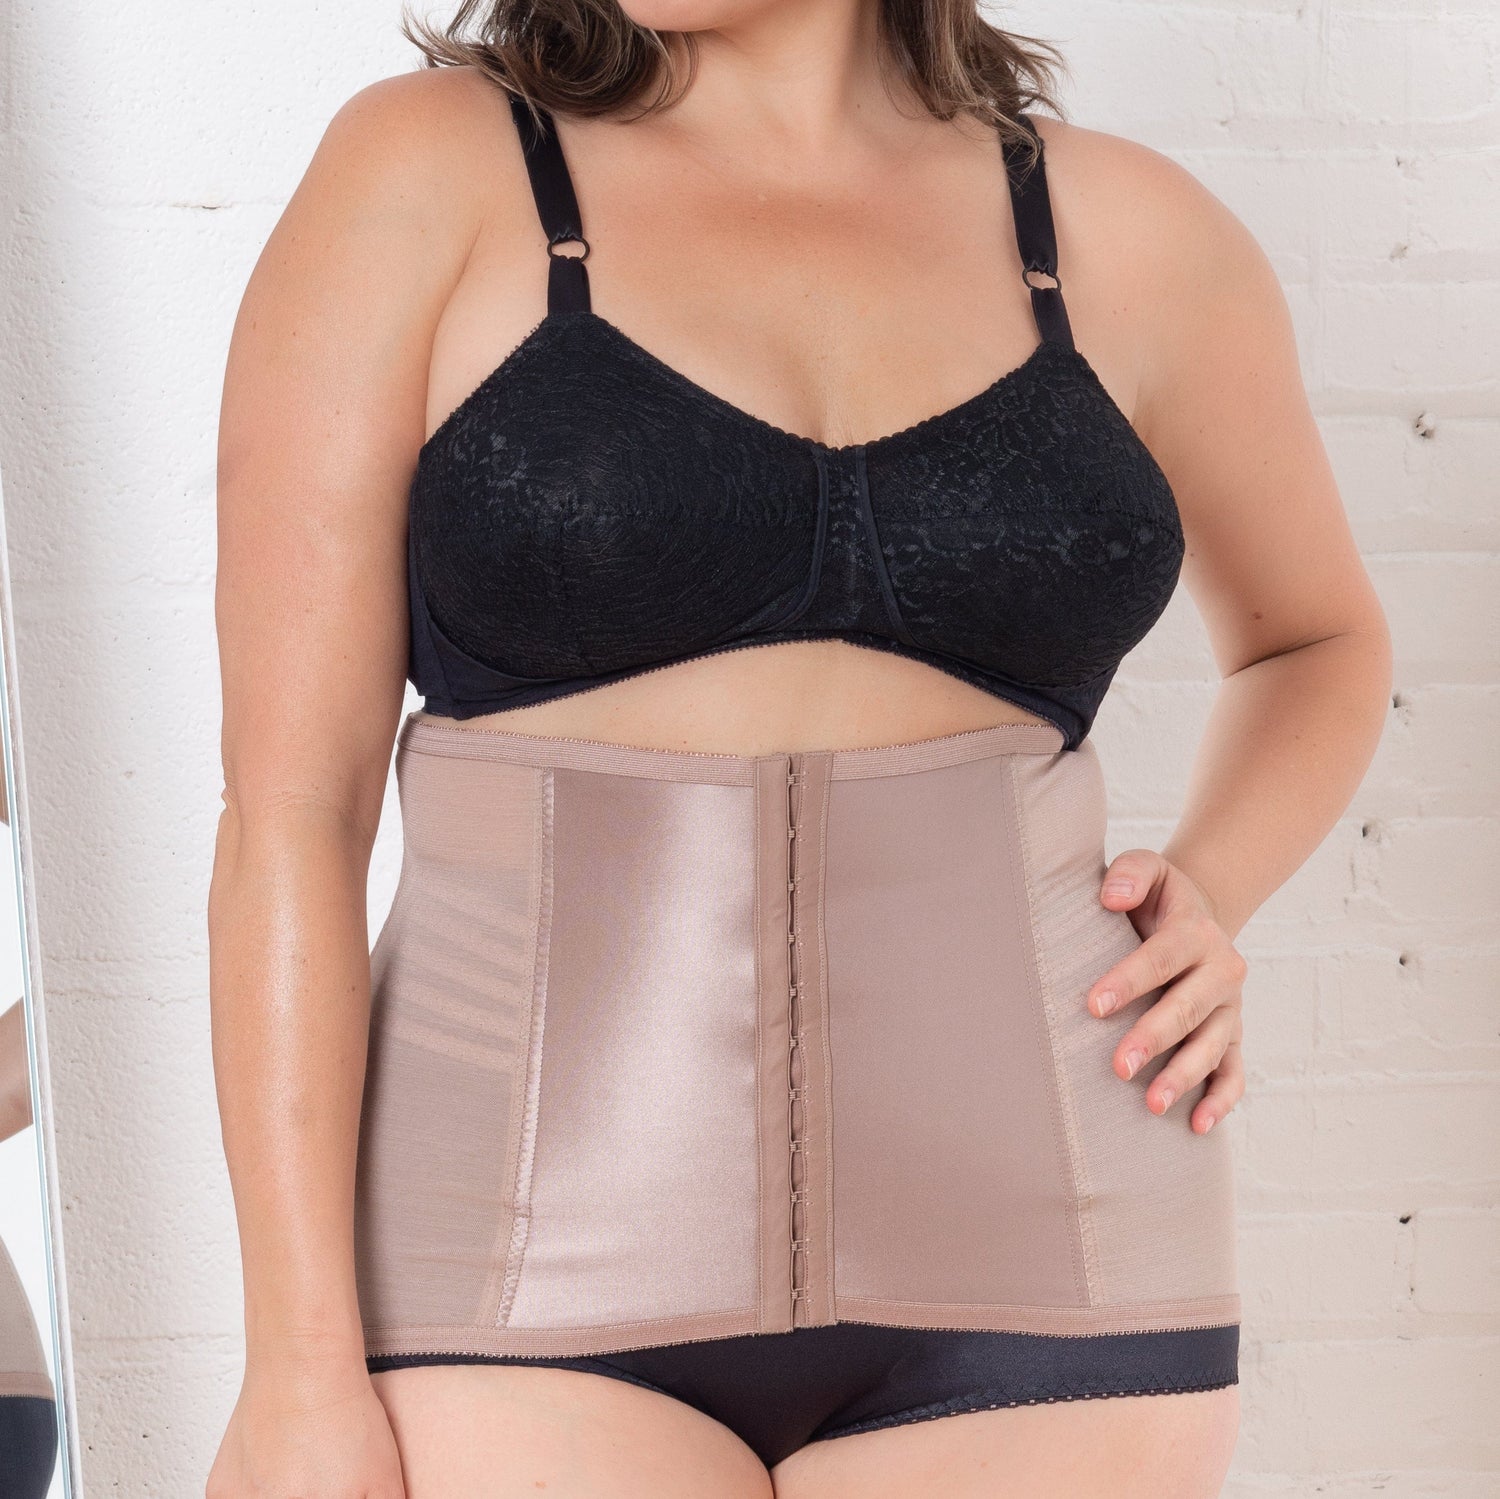 Rago Shapewear - Do you need extra support? #2202 has your back with  two-way stretch and flexible stitching for back support. Order now using  the link in our bio! Photo: @howdysister #ragoshapewear#shapewear #